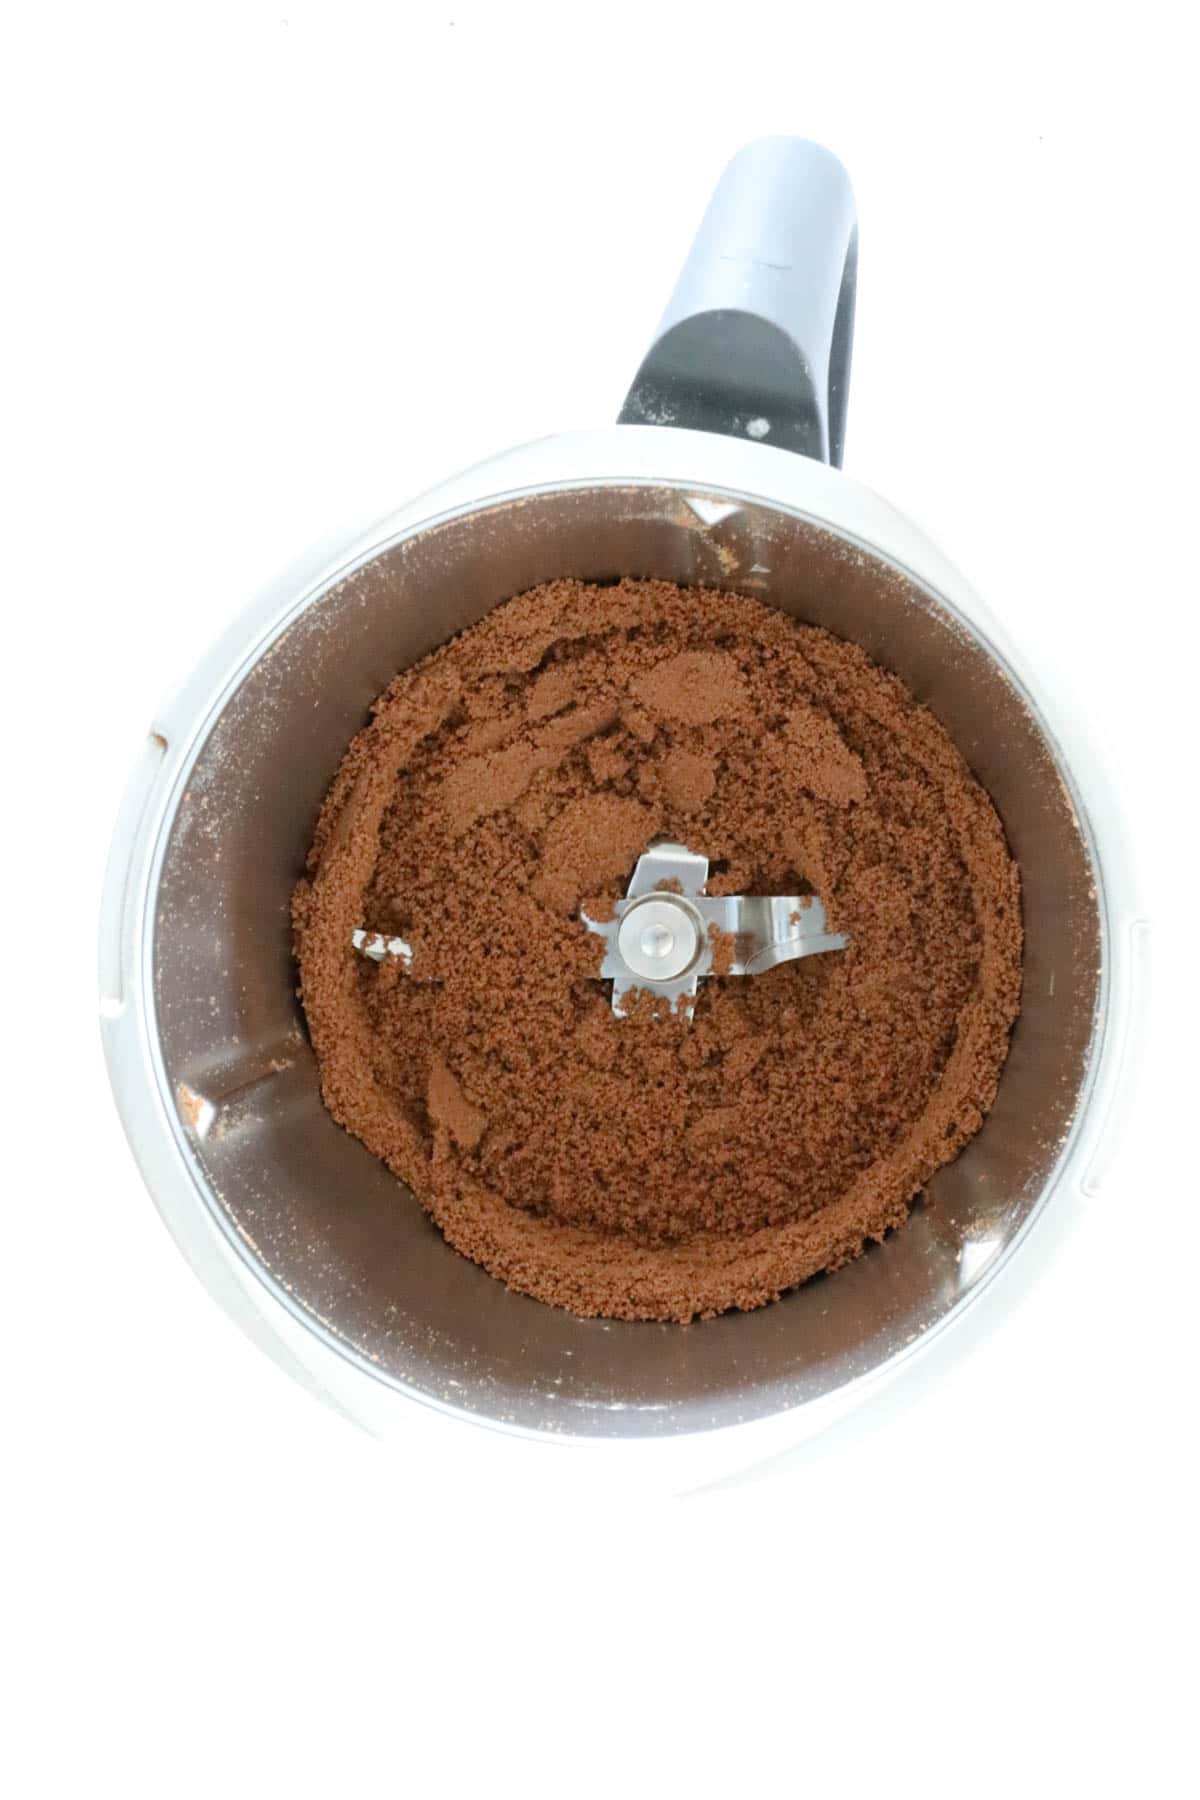 Crushed Tim Tams in a Thermomix.